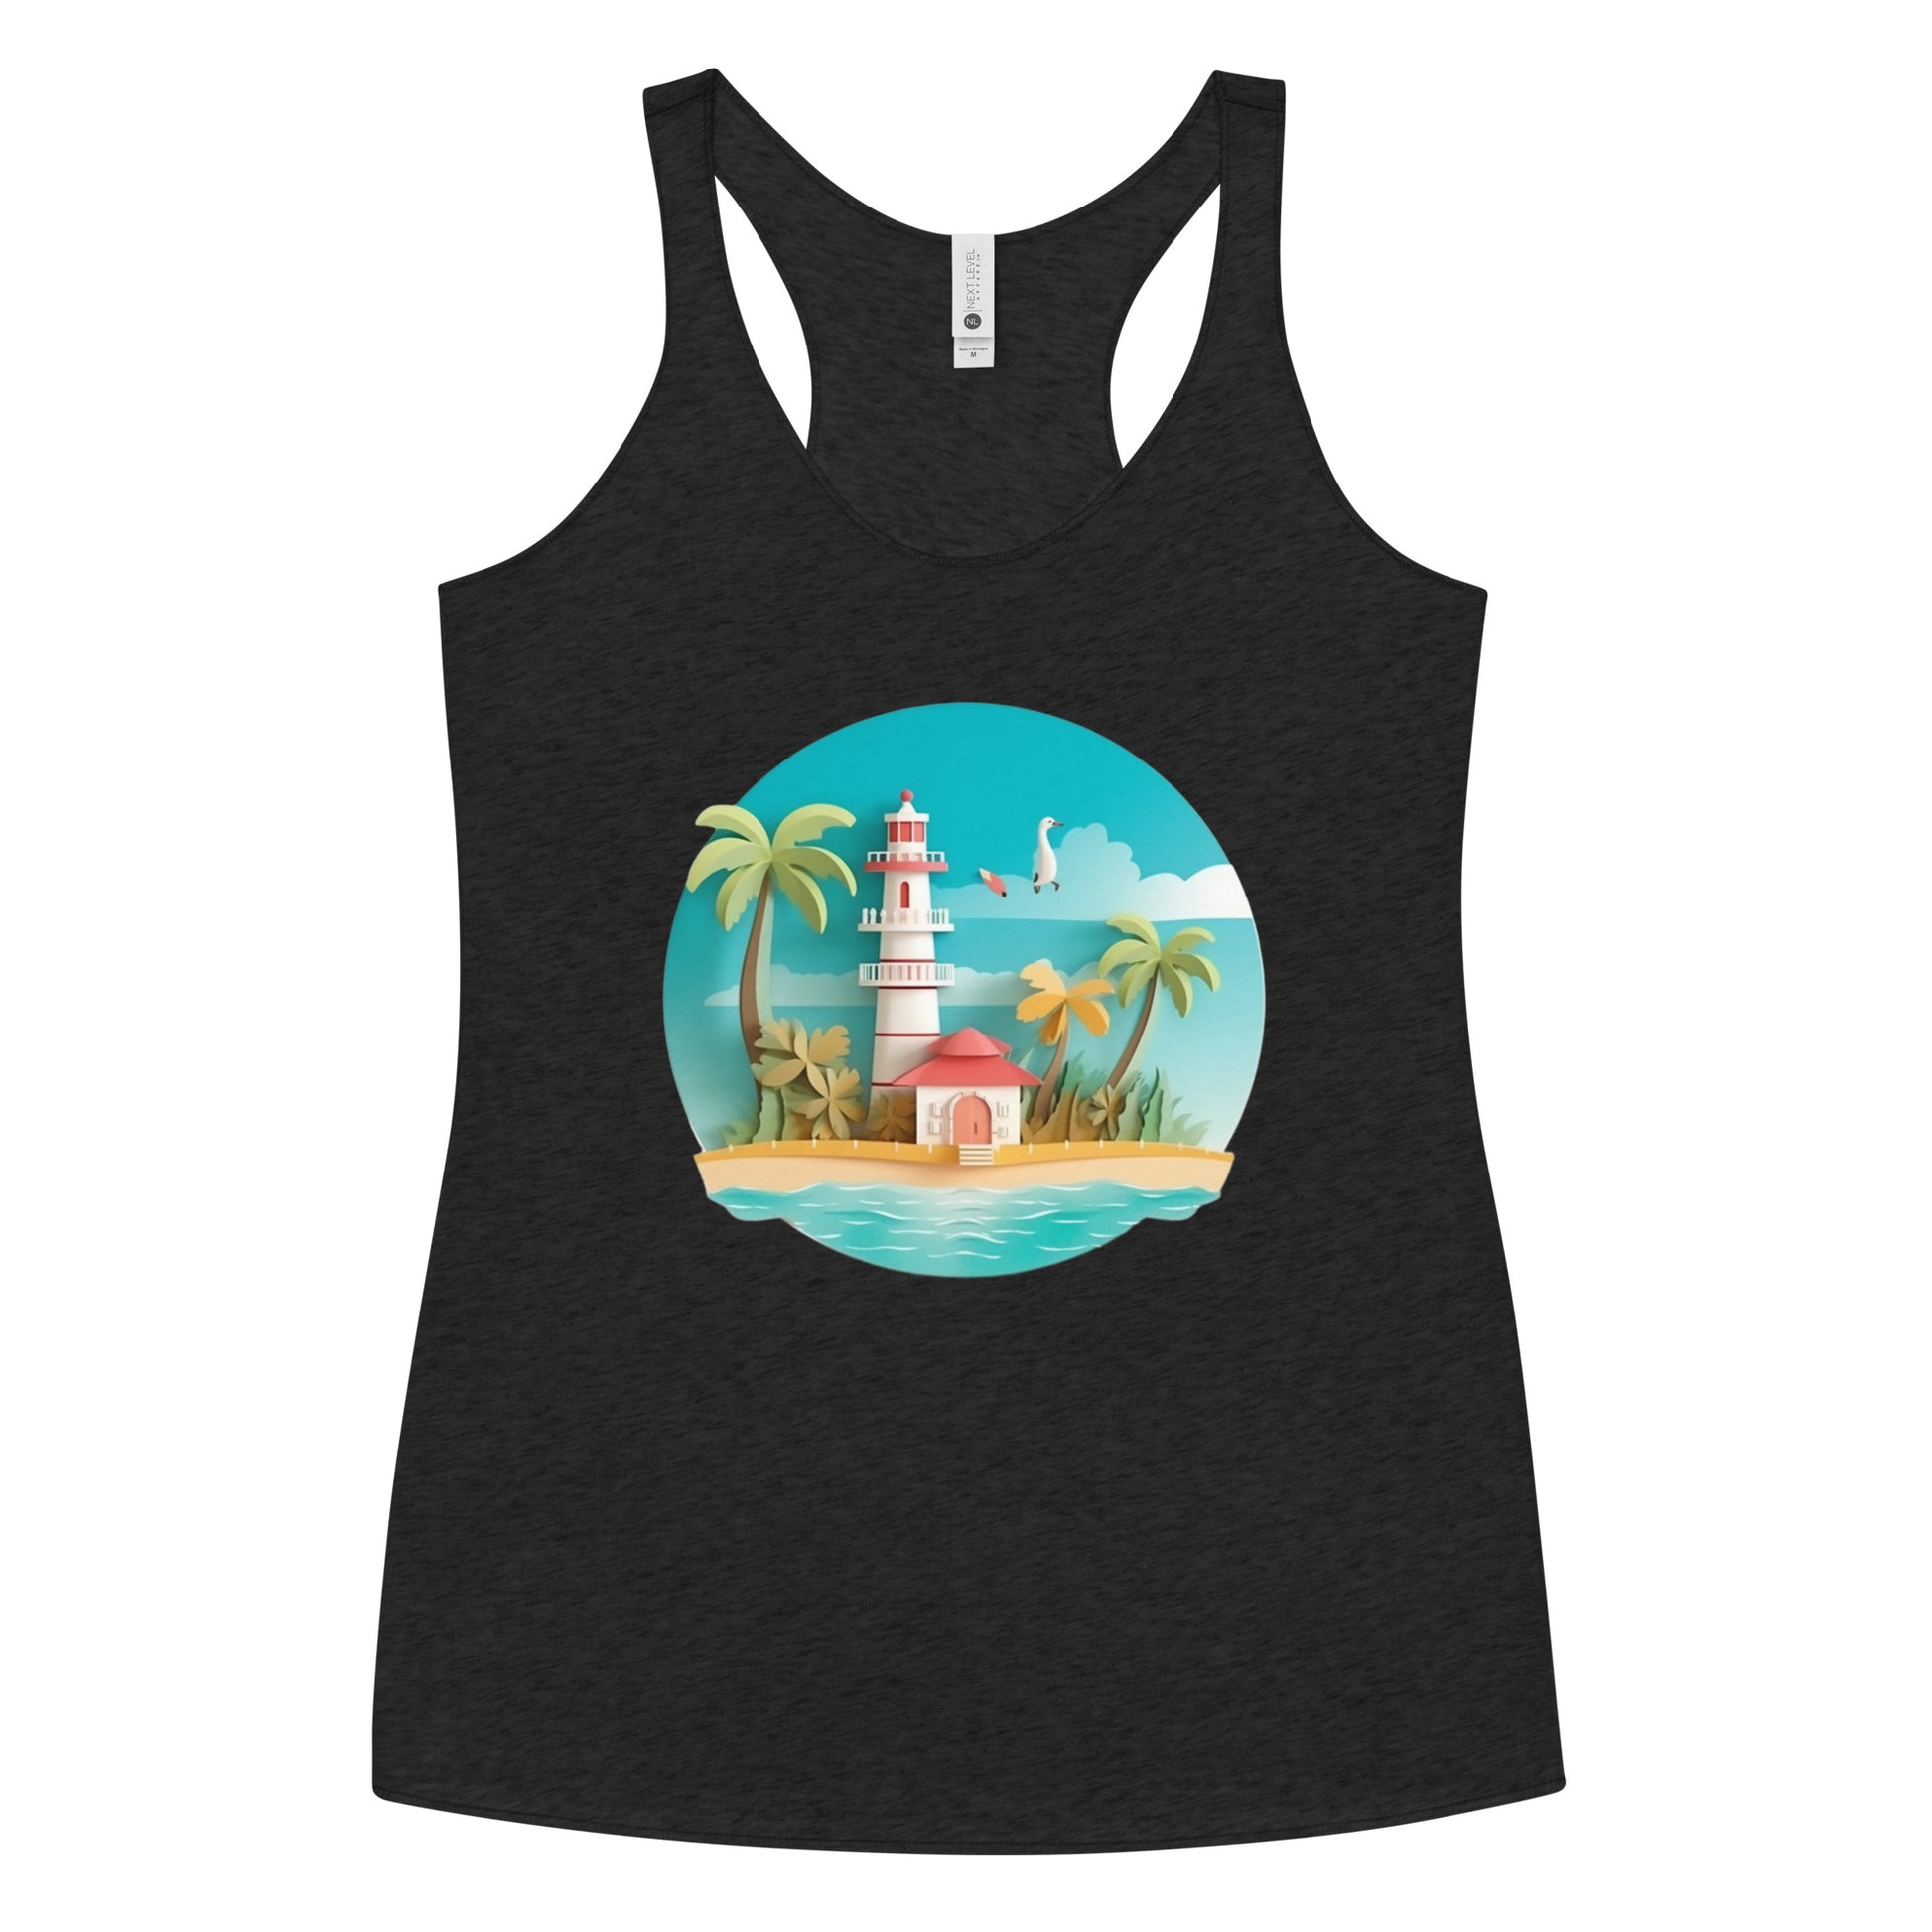 Black tank top with picture of lighthouse and palm trees